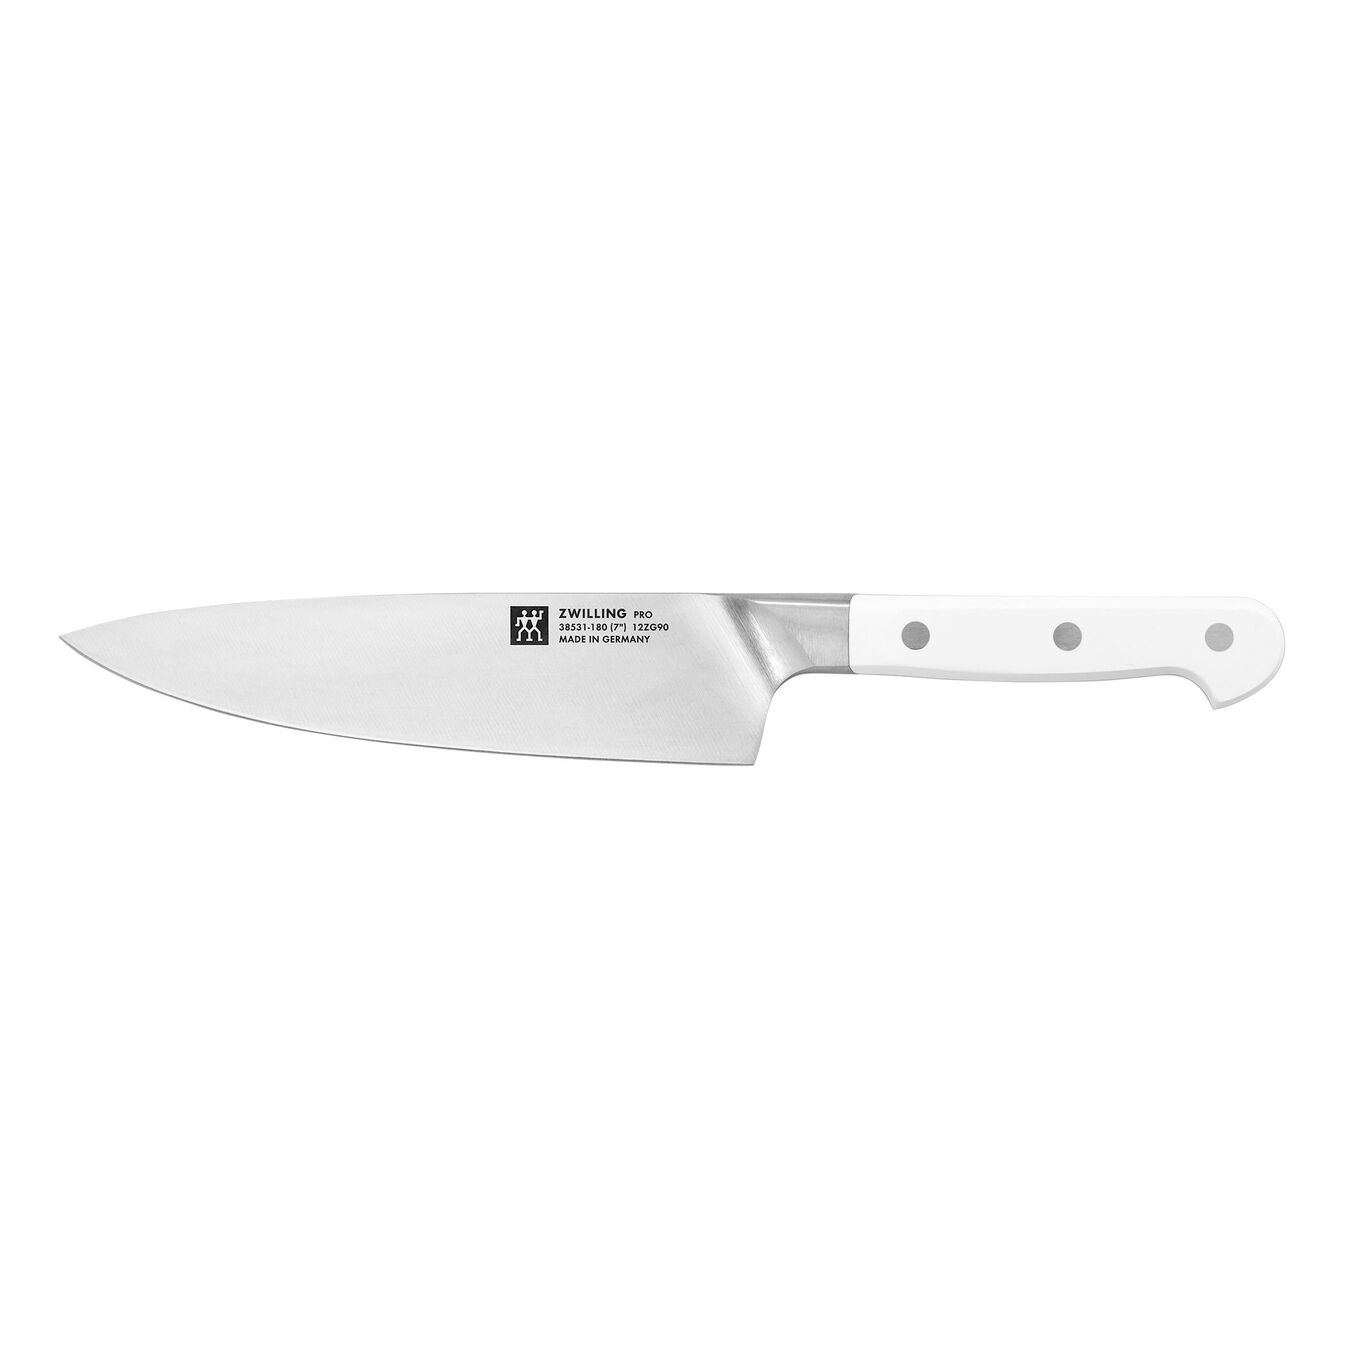 7-inch, Chef's SLIM Knife,,large 2